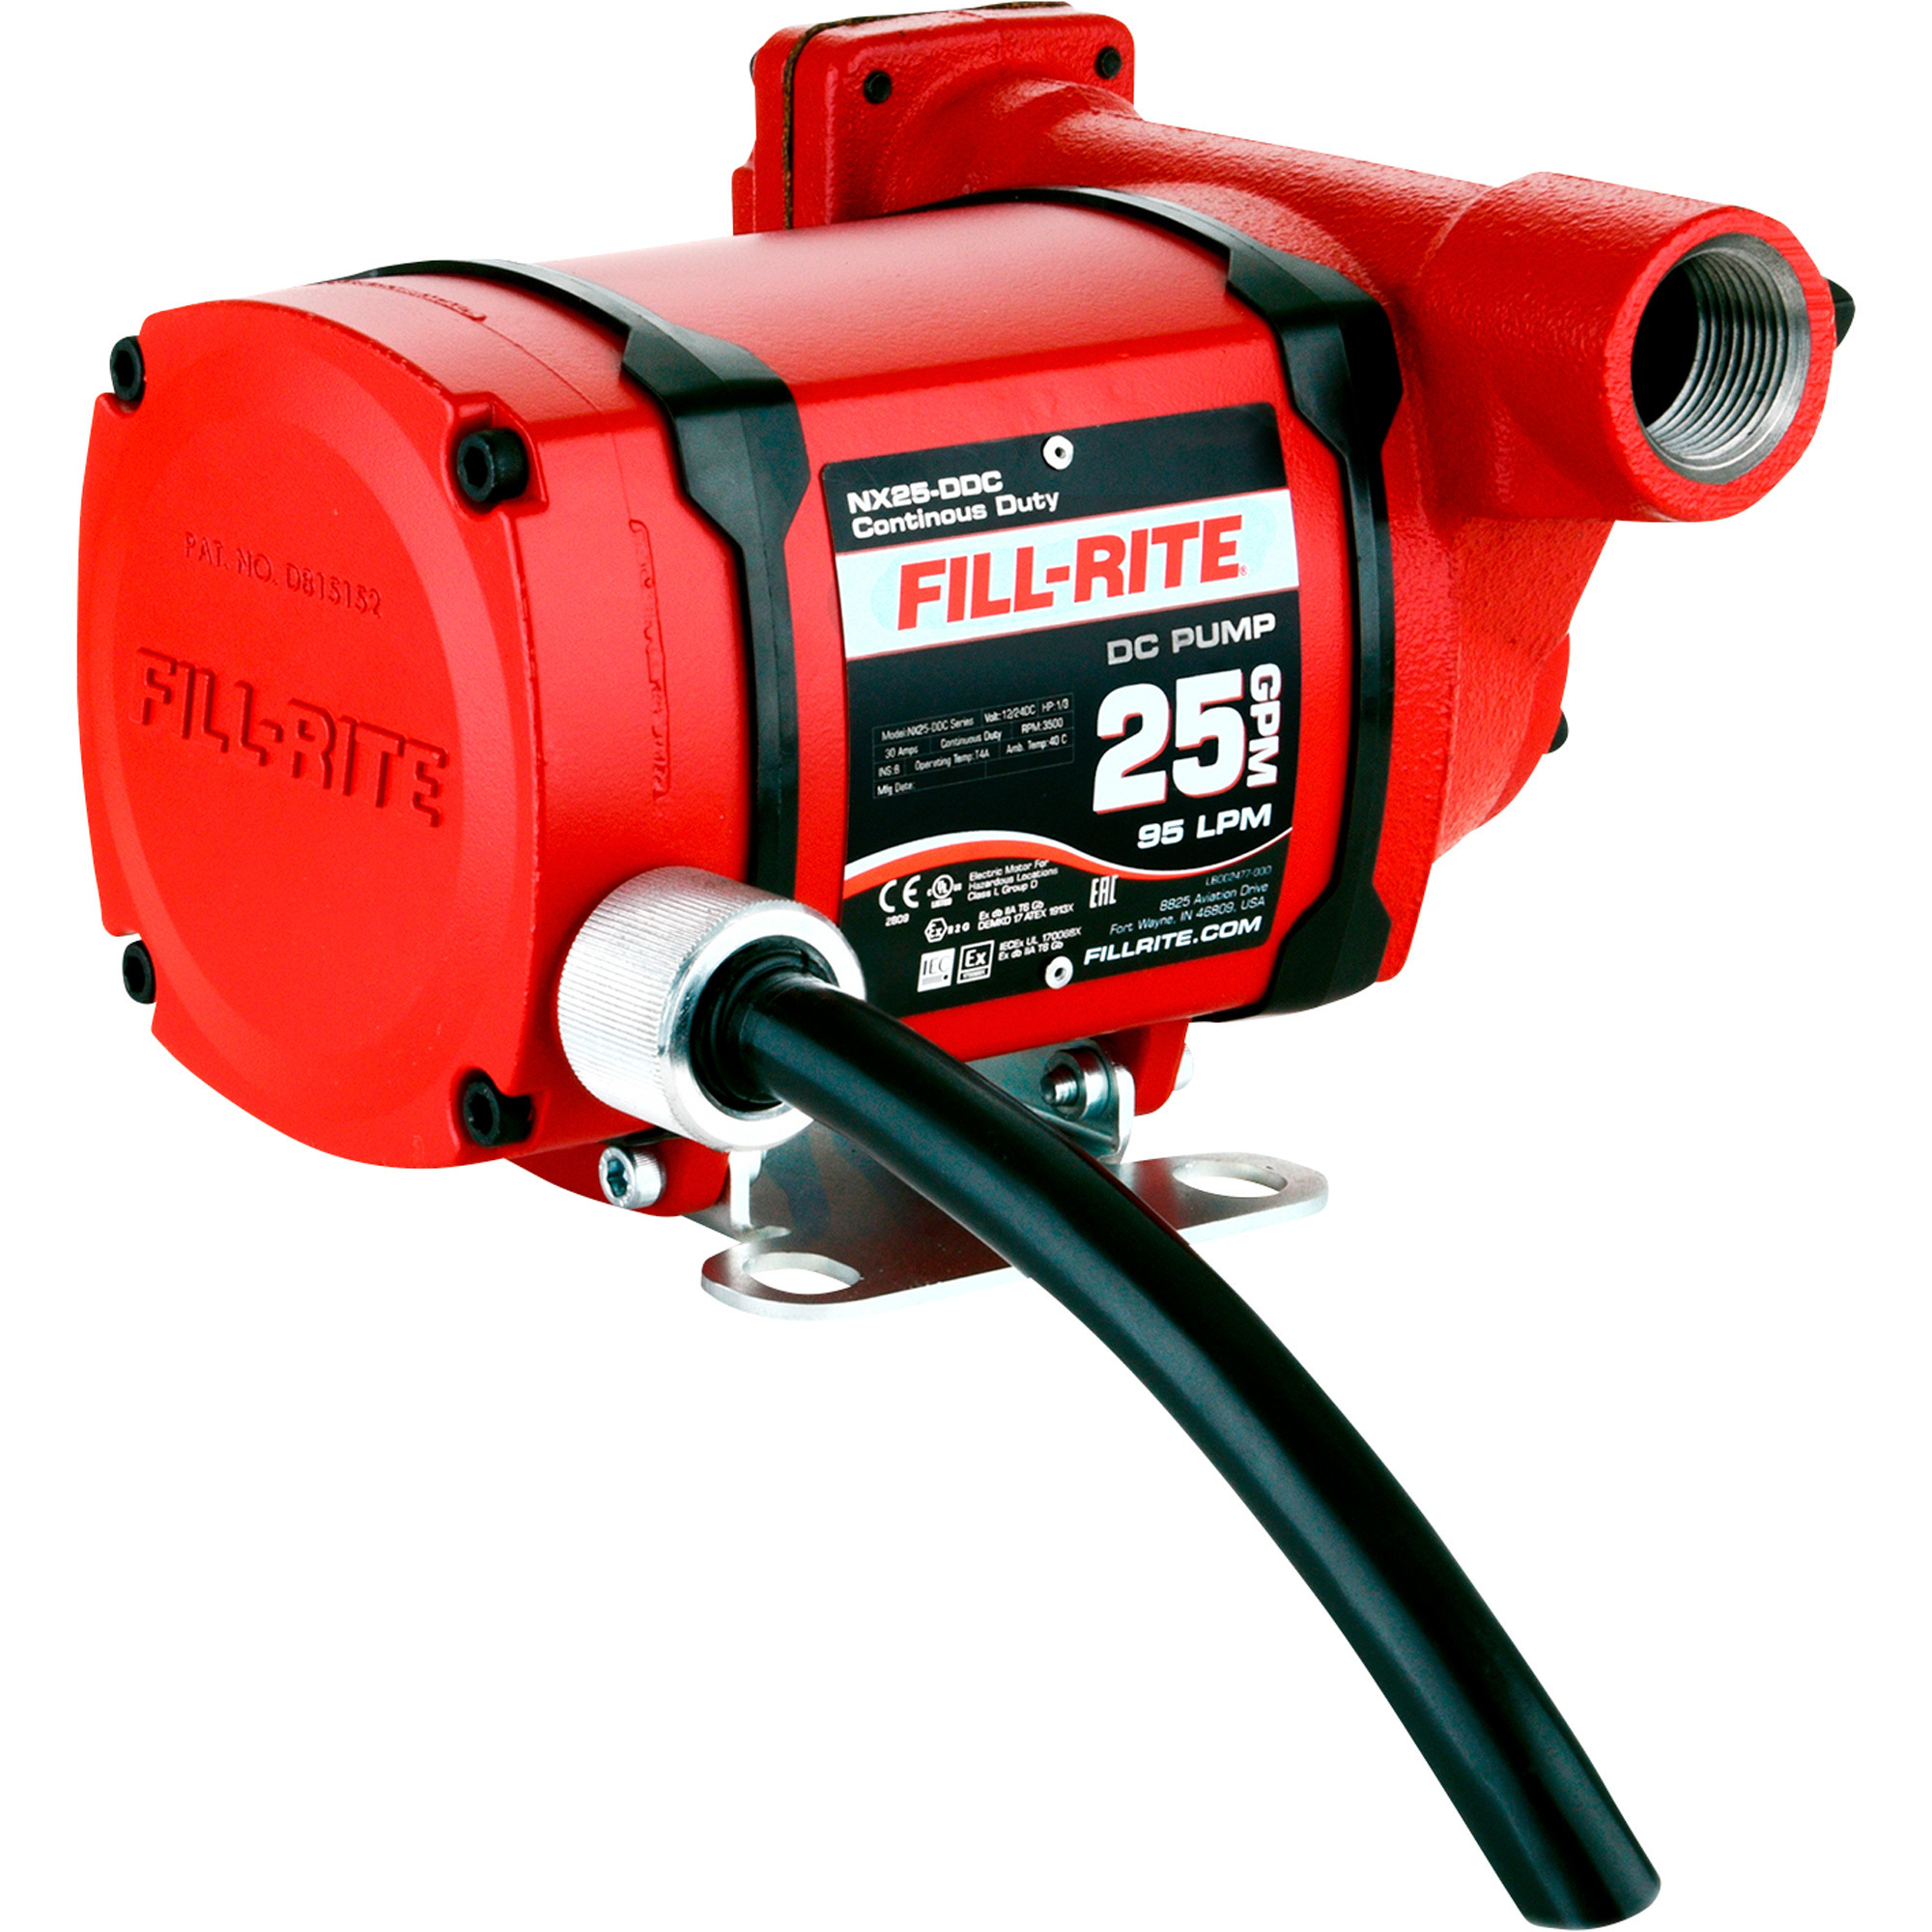 Fill-Rite Fuel Transfer Pumps, Meters, and Accessories